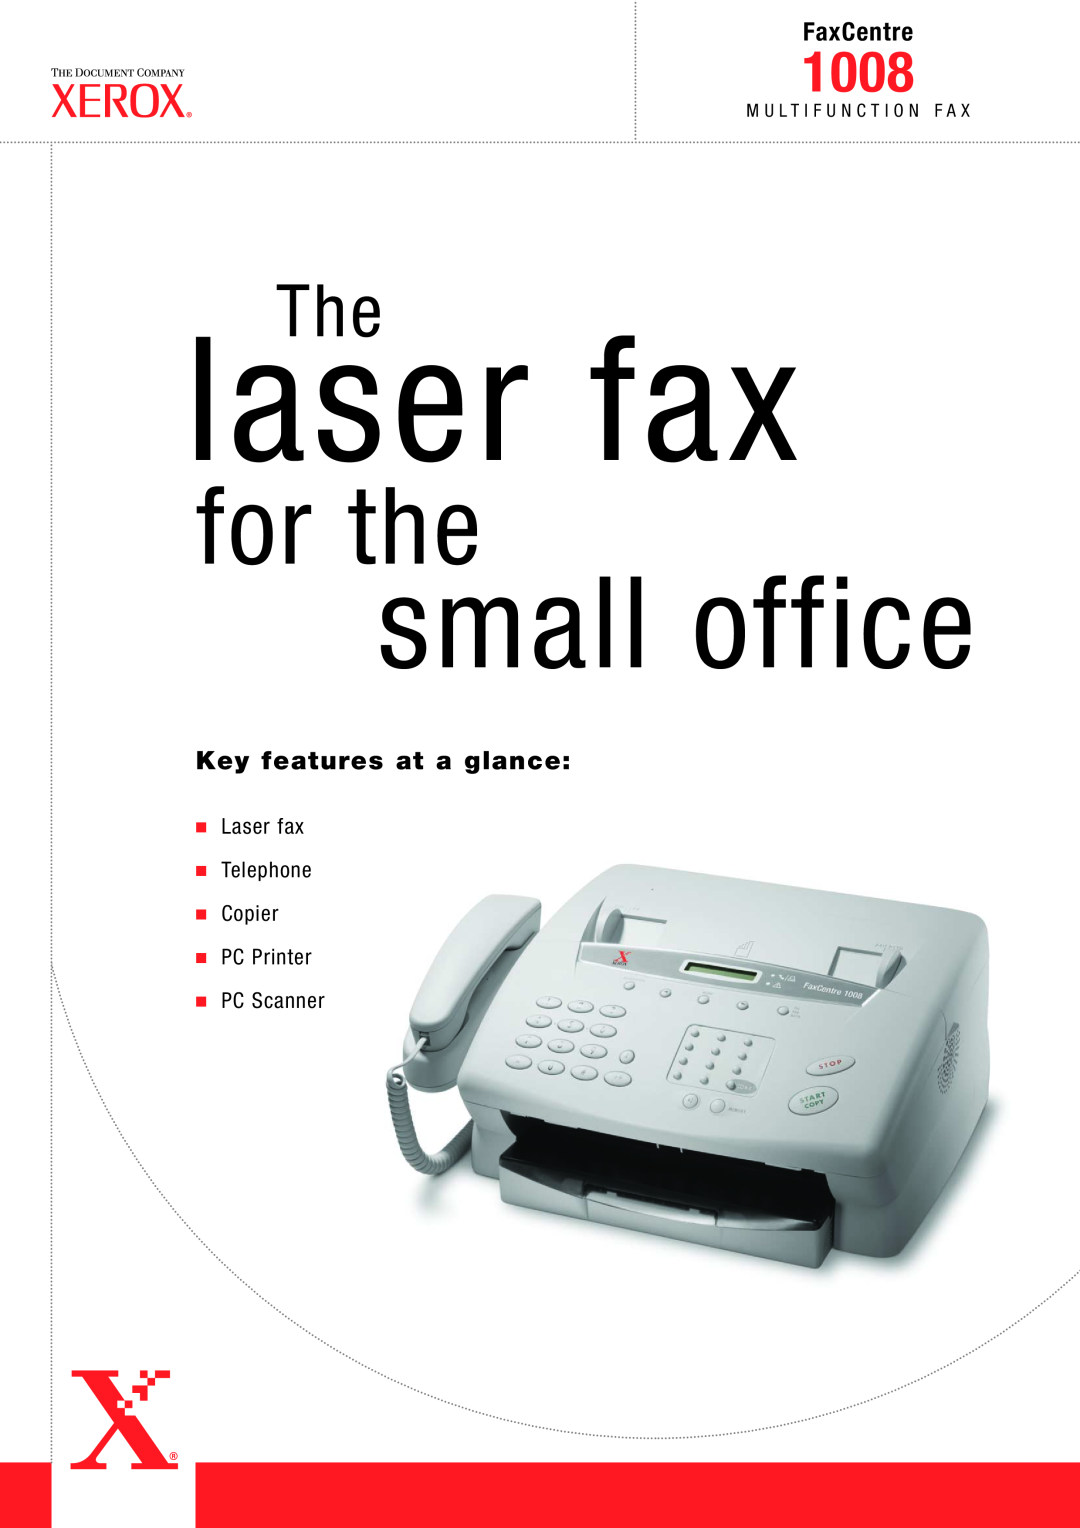 Xerox 1008M manual FaxCentre, Key features at a glance, M U L T I F U N C T I O N F A, laser fax, small office, for the 